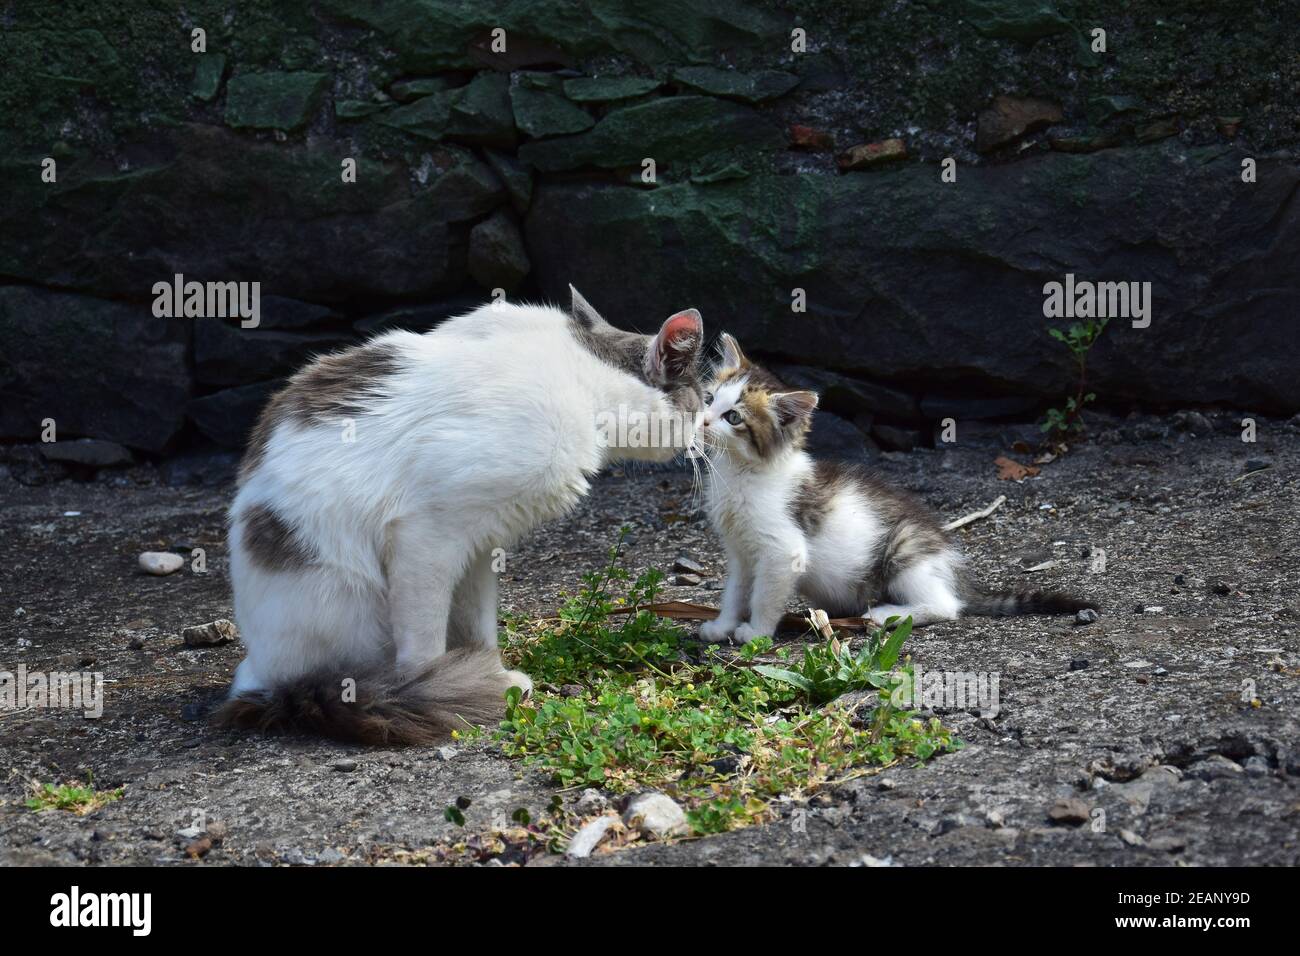 A cute baby cat and its mother, having contact with their noses. Madeira, Portugal. Stock Photo